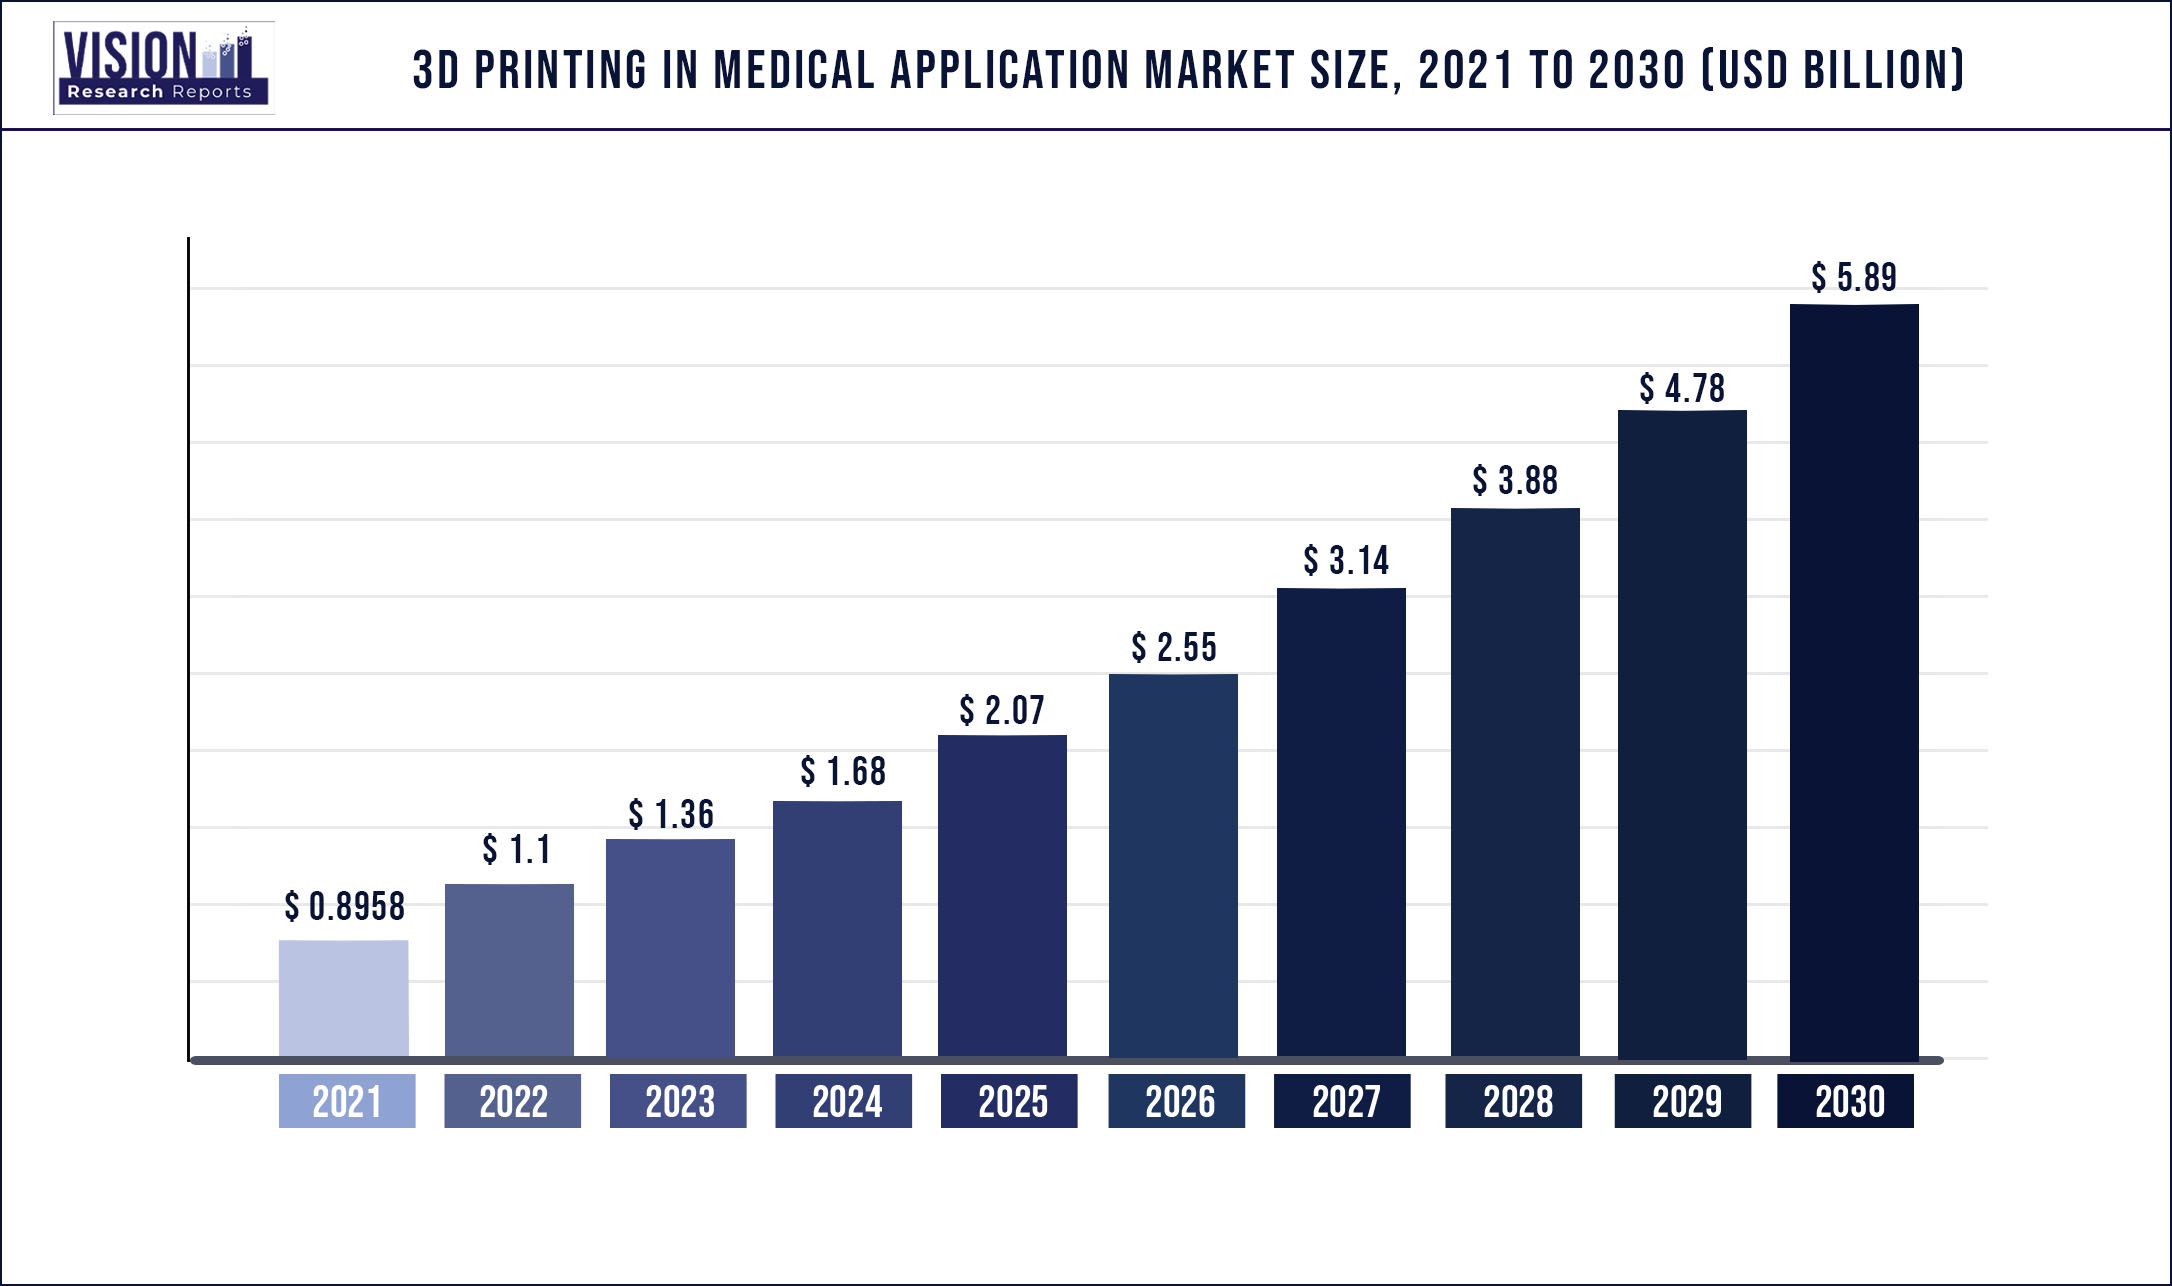 3D Printing in Medical Application Market Size 2021 to 2030